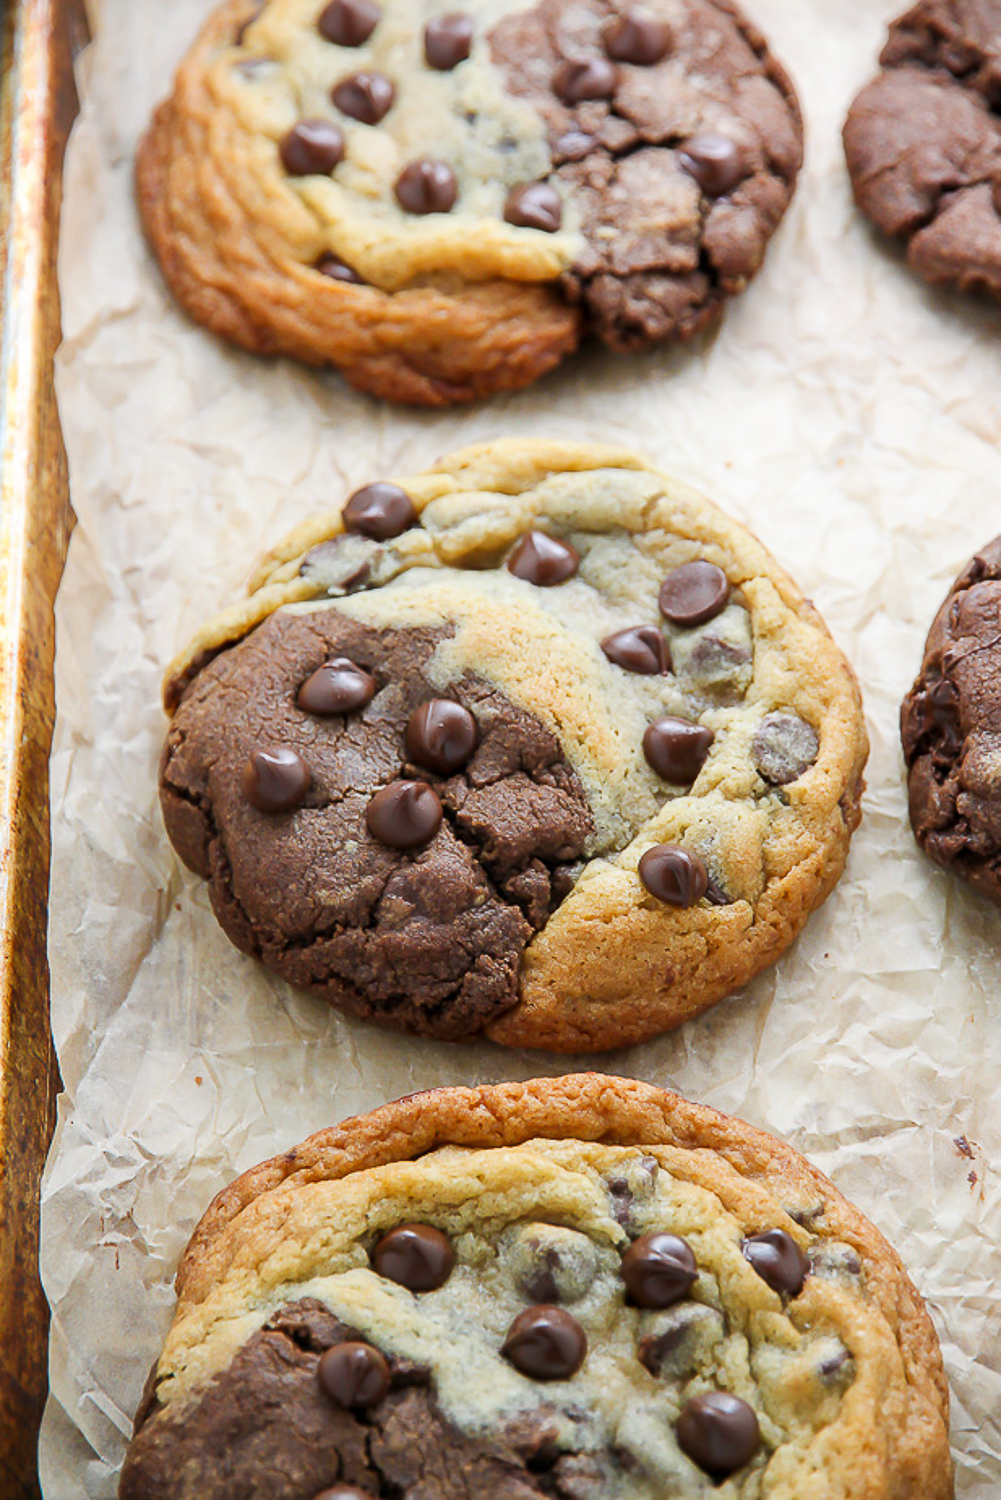 Craving chocolate chip cookies? Well, you're in the right place! Today I'm sharing 21 chocolate chip cookie recipes sure to cure ANY craving! Seriously! So whether you're looking for mini chocolate chip cookies, vegan chocolate chip cookies, or monster chocolate chip cookies loaded with m&ms and chewy oats, I've got you covered! 